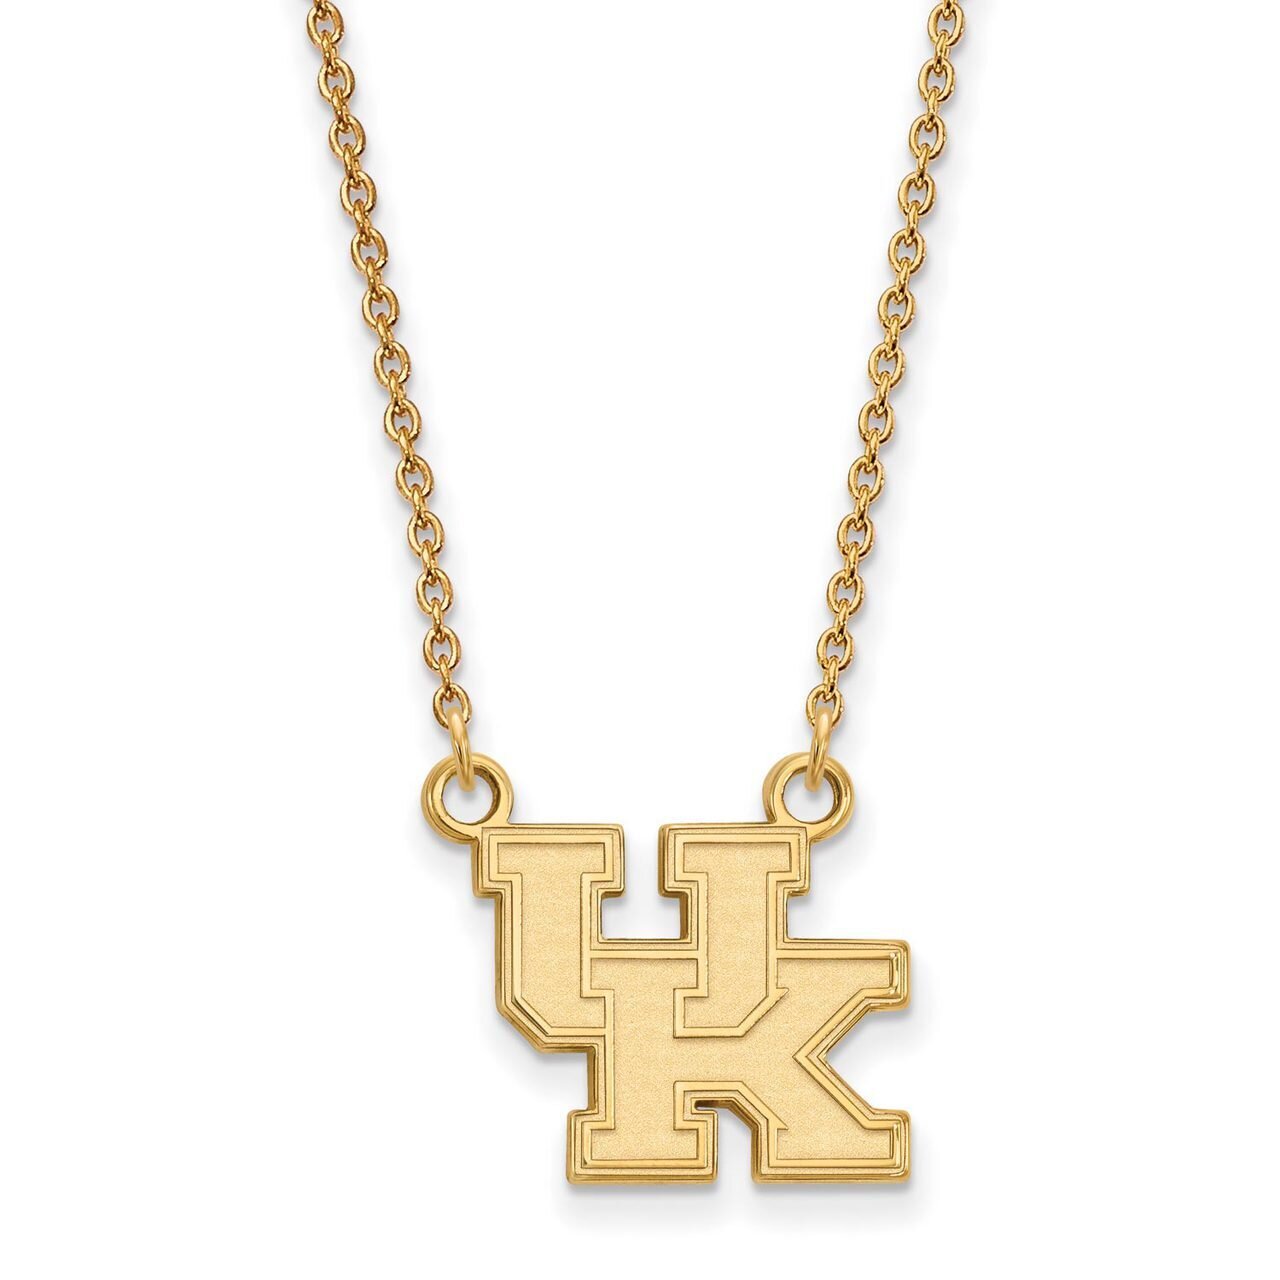 University of Kentucky Small Pendant with Chain Necklace 10k Yellow Gold 1Y015UK-18